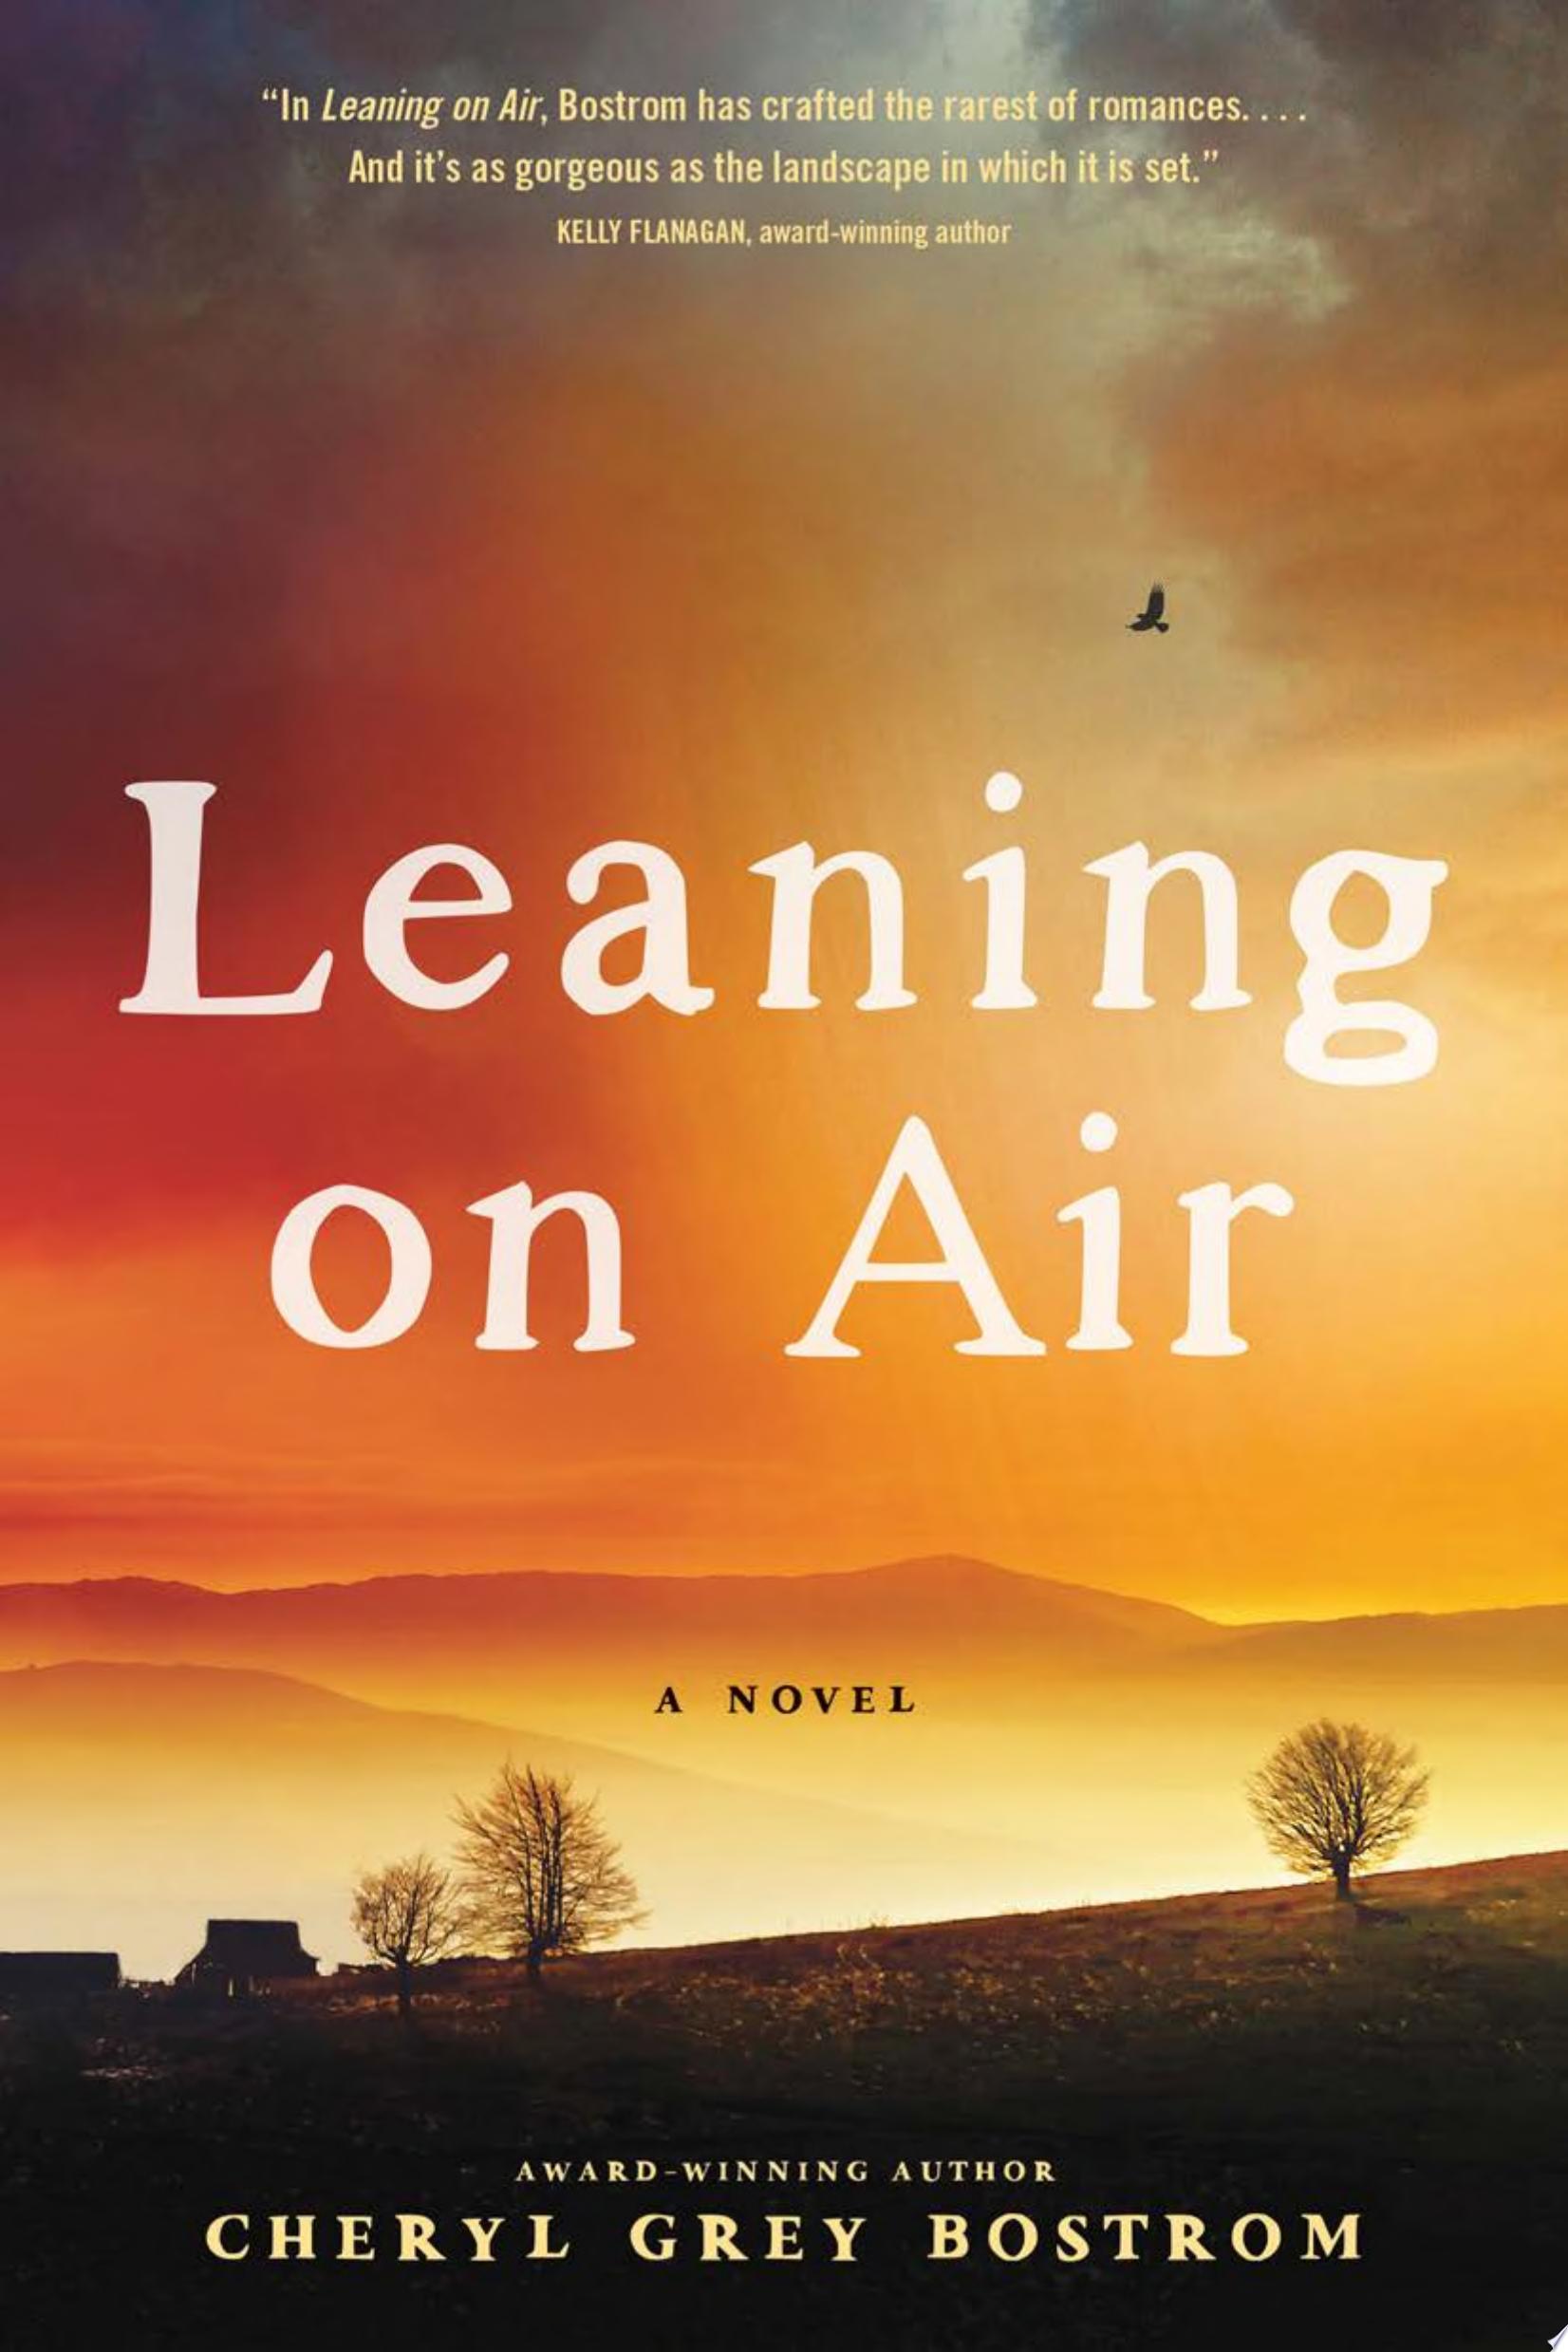 Image for "Leaning on Air"